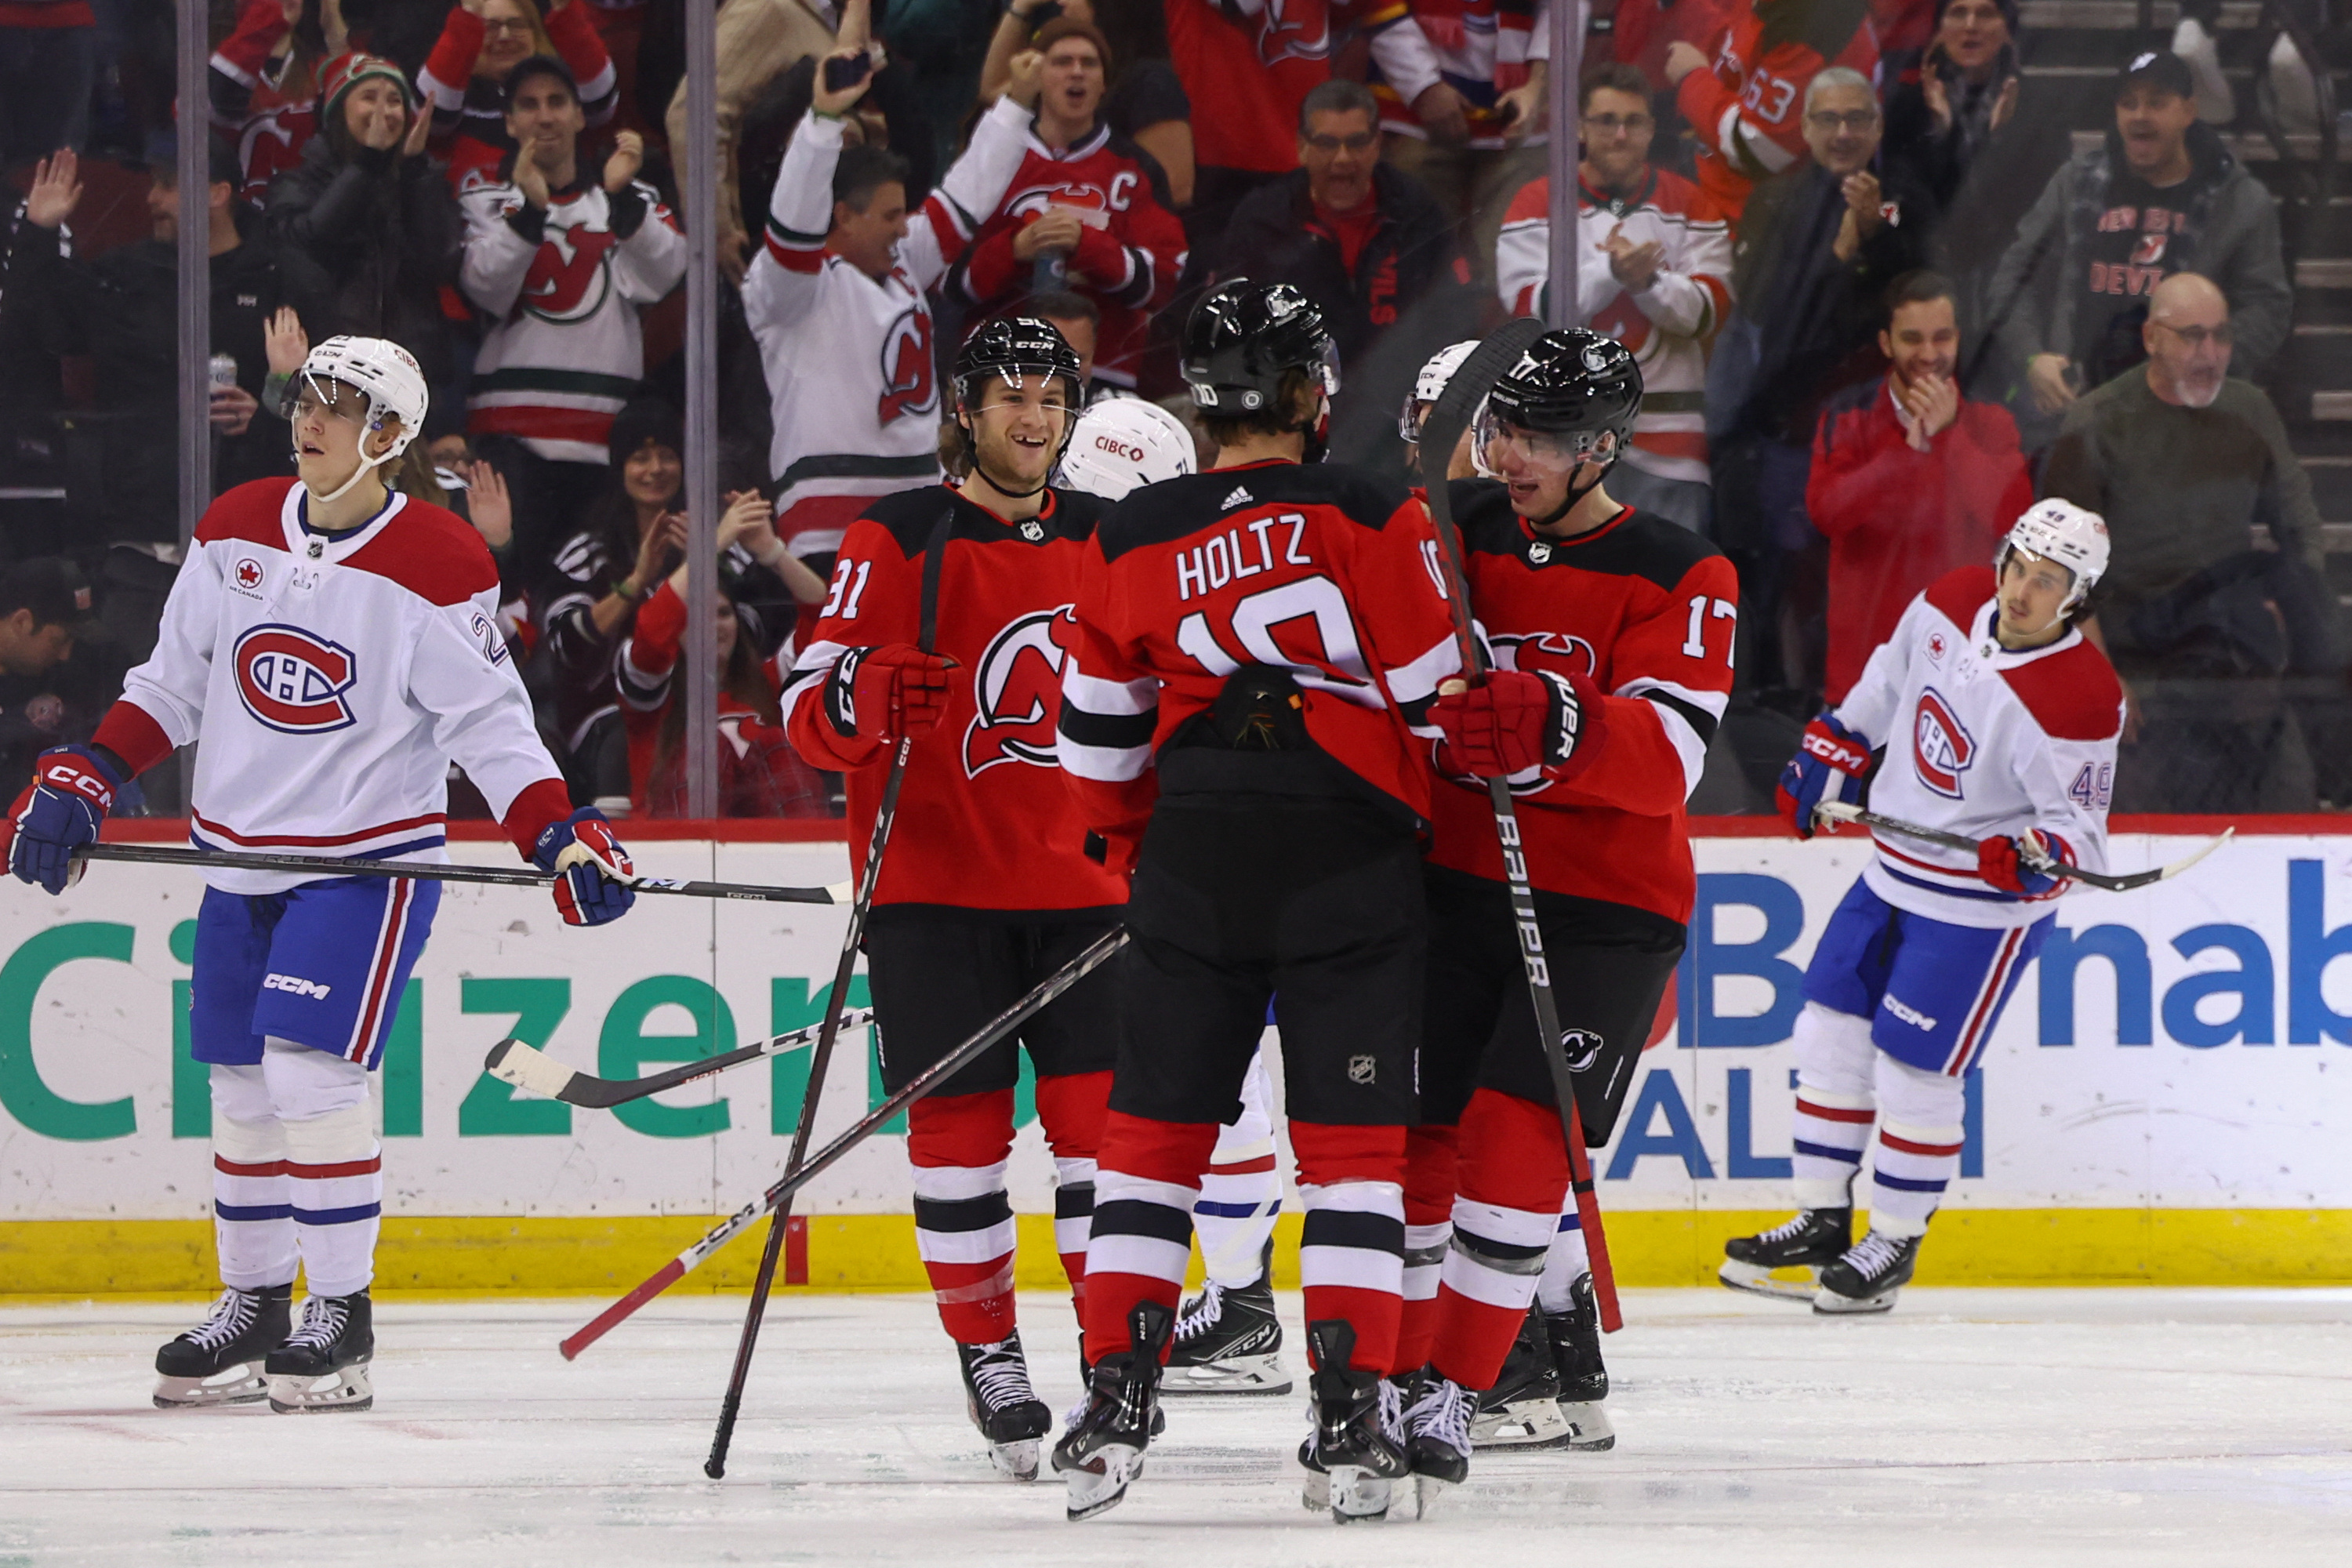 Devils rally, but Canadiens prevail on late goal | Reuters